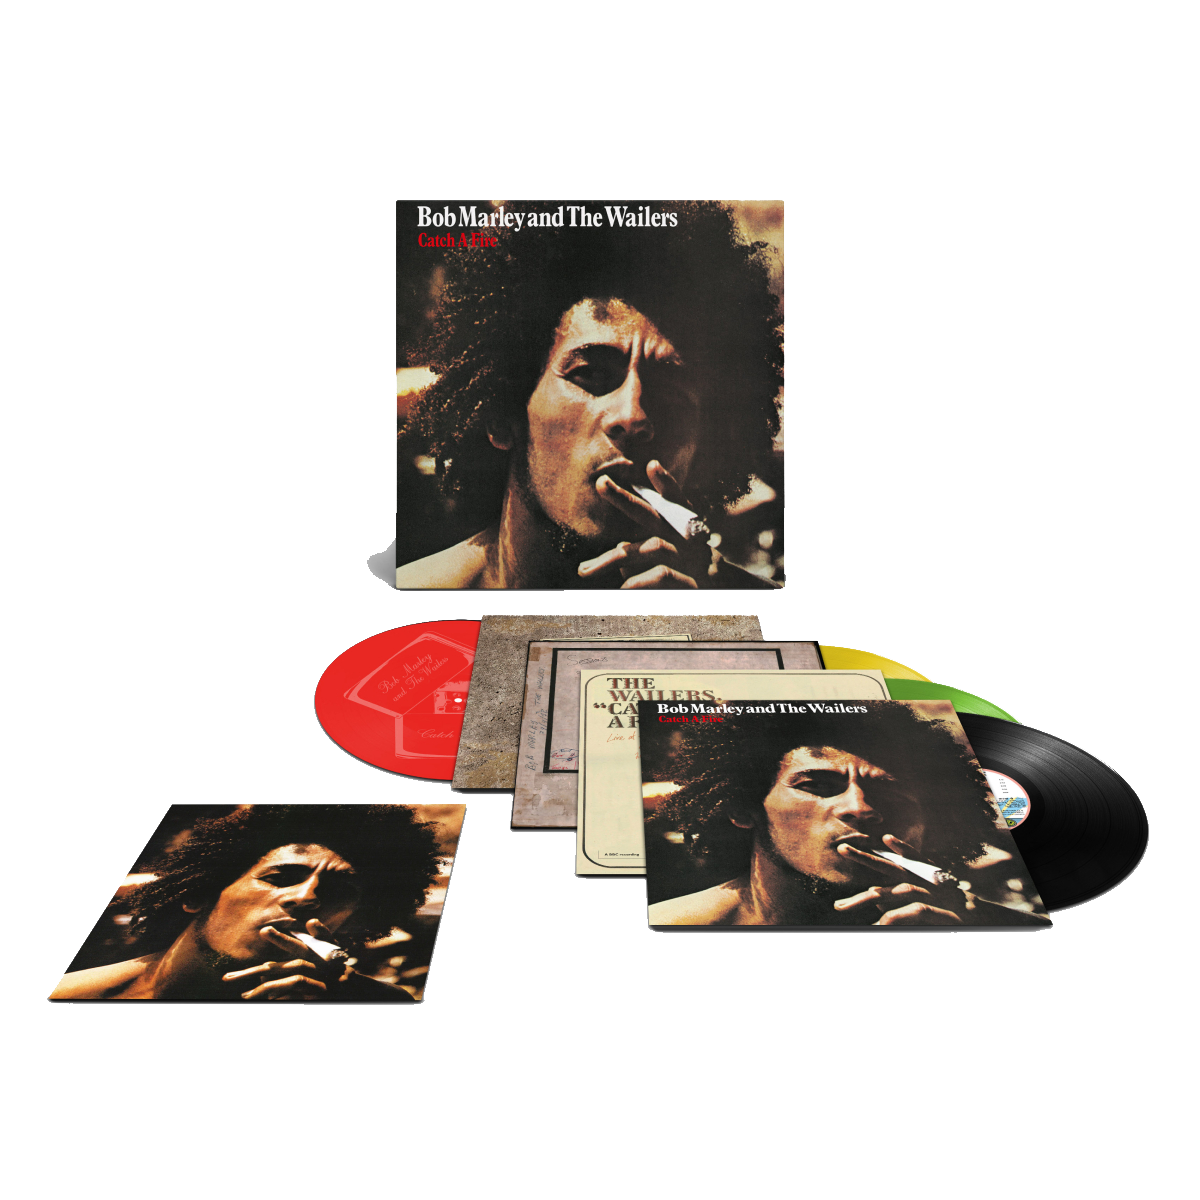 Bob Marley and The Wailers - Catch A Fire - 50th Anniversary Edition Exclusive Colour Vinyl 3LP + 12''